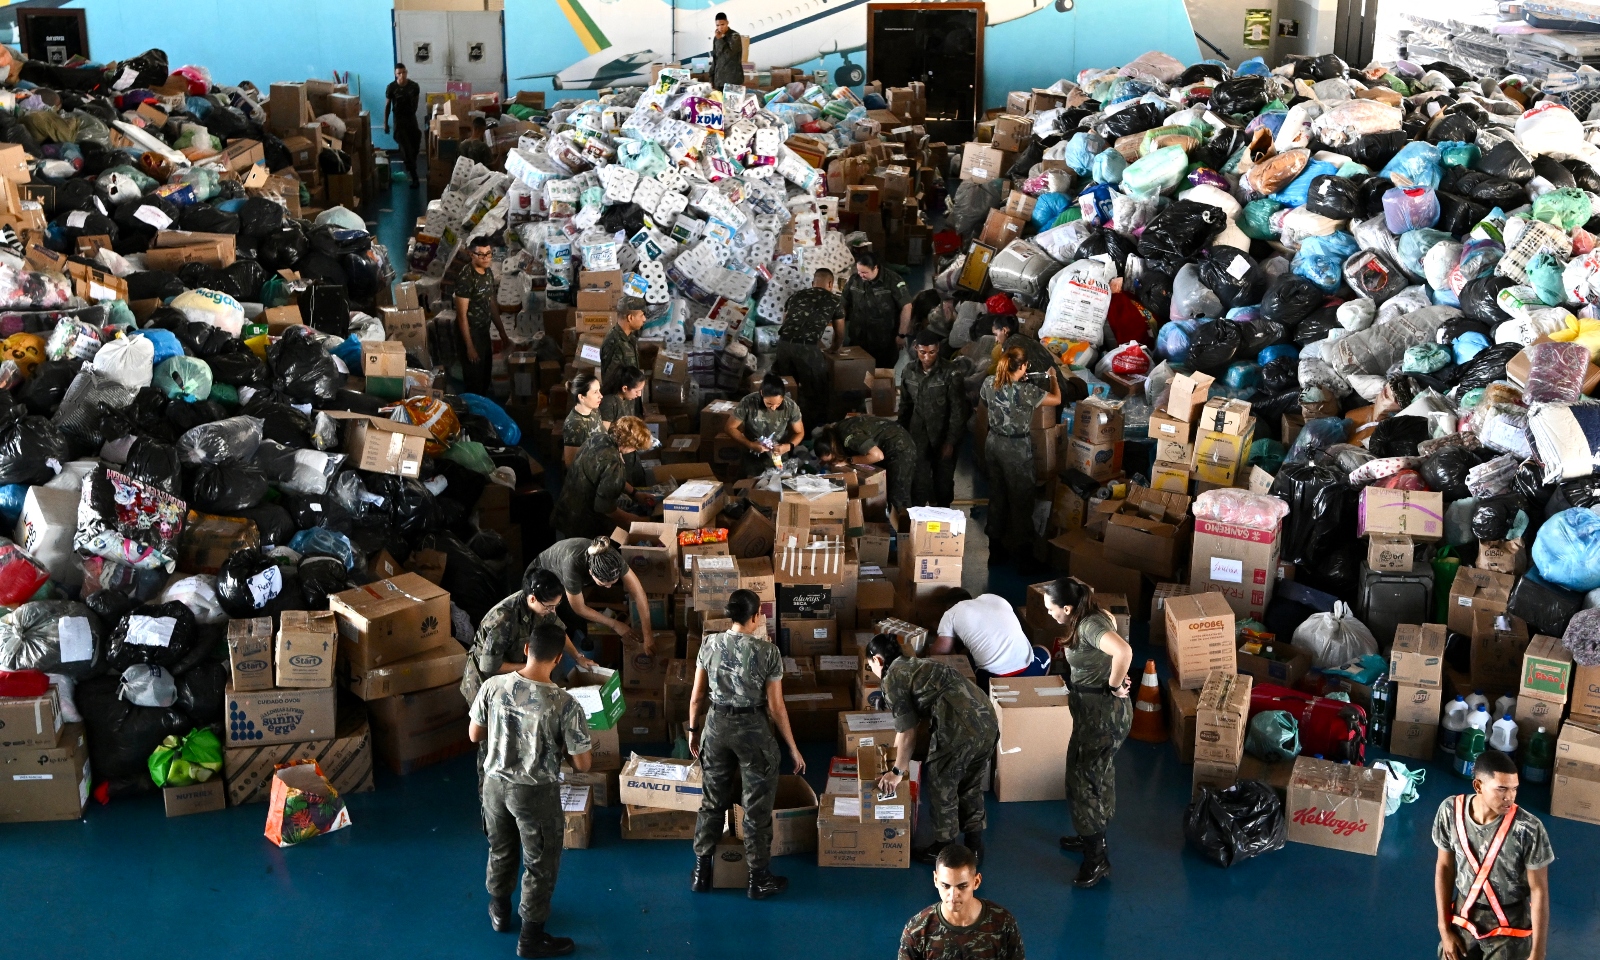 Soldiers in uniform stand in front of three towering mountains of donated clothing and food stuffs. Some of the goods are loose and some are in brown cardboard boxes.